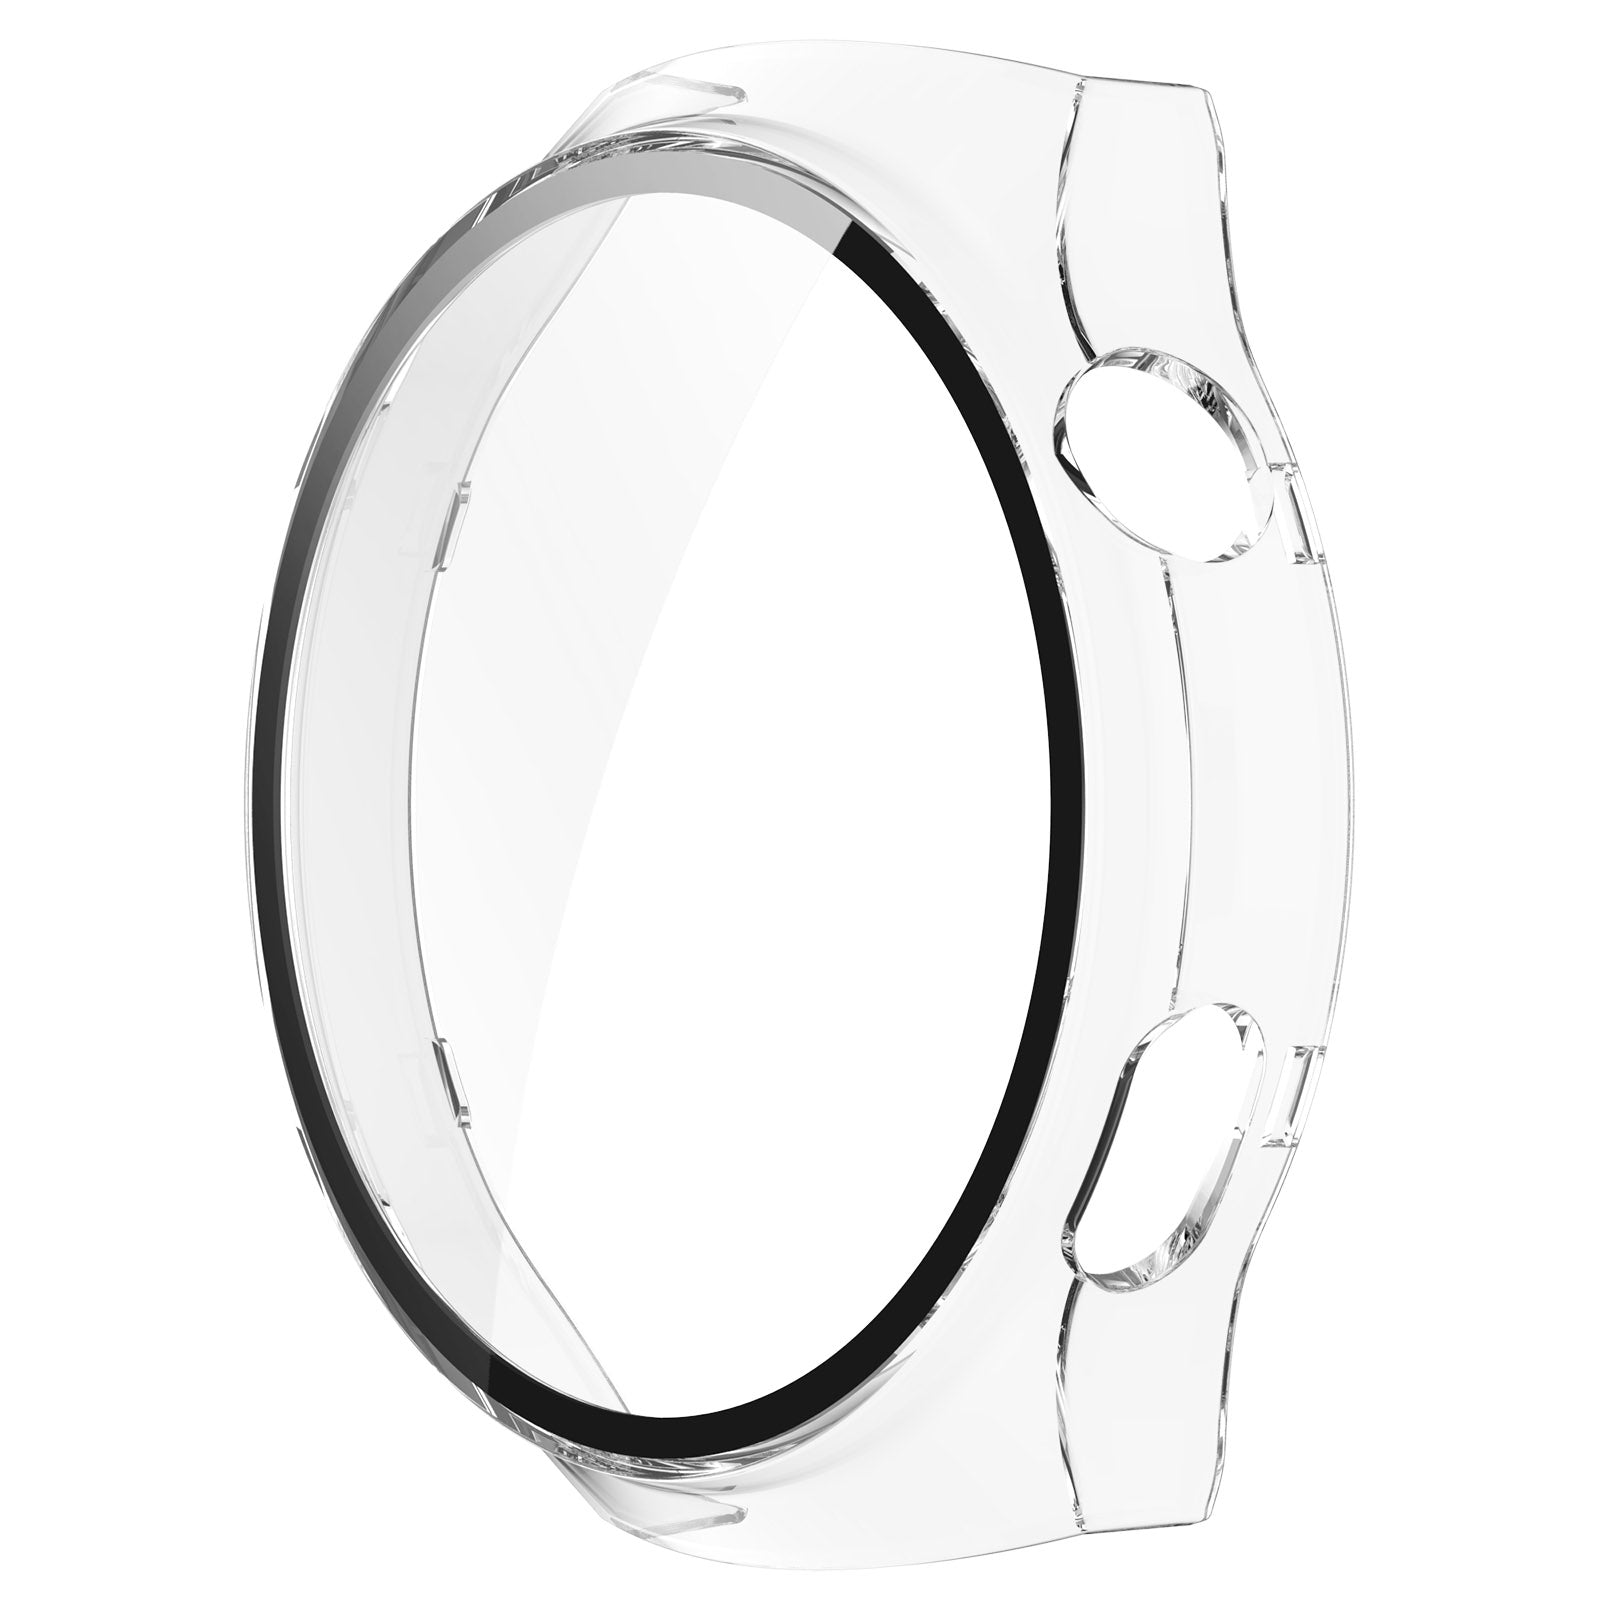 For Huawei Watch 4 Pro Case PC Cover with Curved Tempered Glass Screen Protector - Transparent White